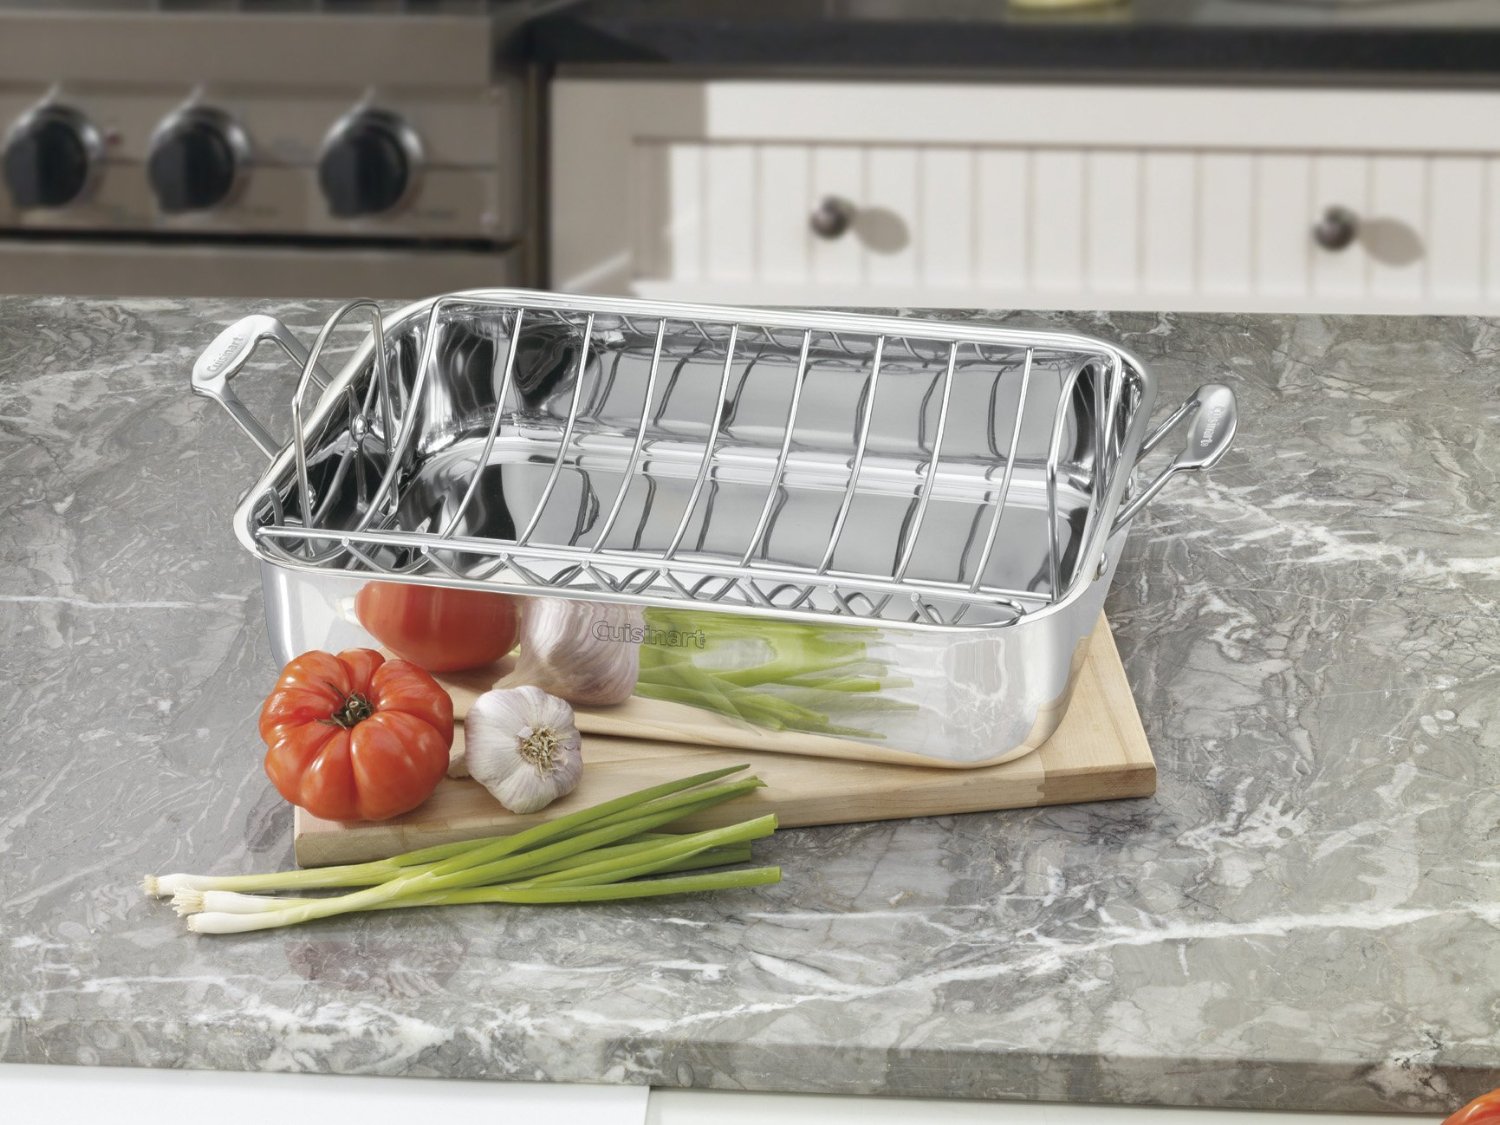 Cuisinart Chef's Classic Stainless 16-Inch Rectangular Roaster with Rack $55.75